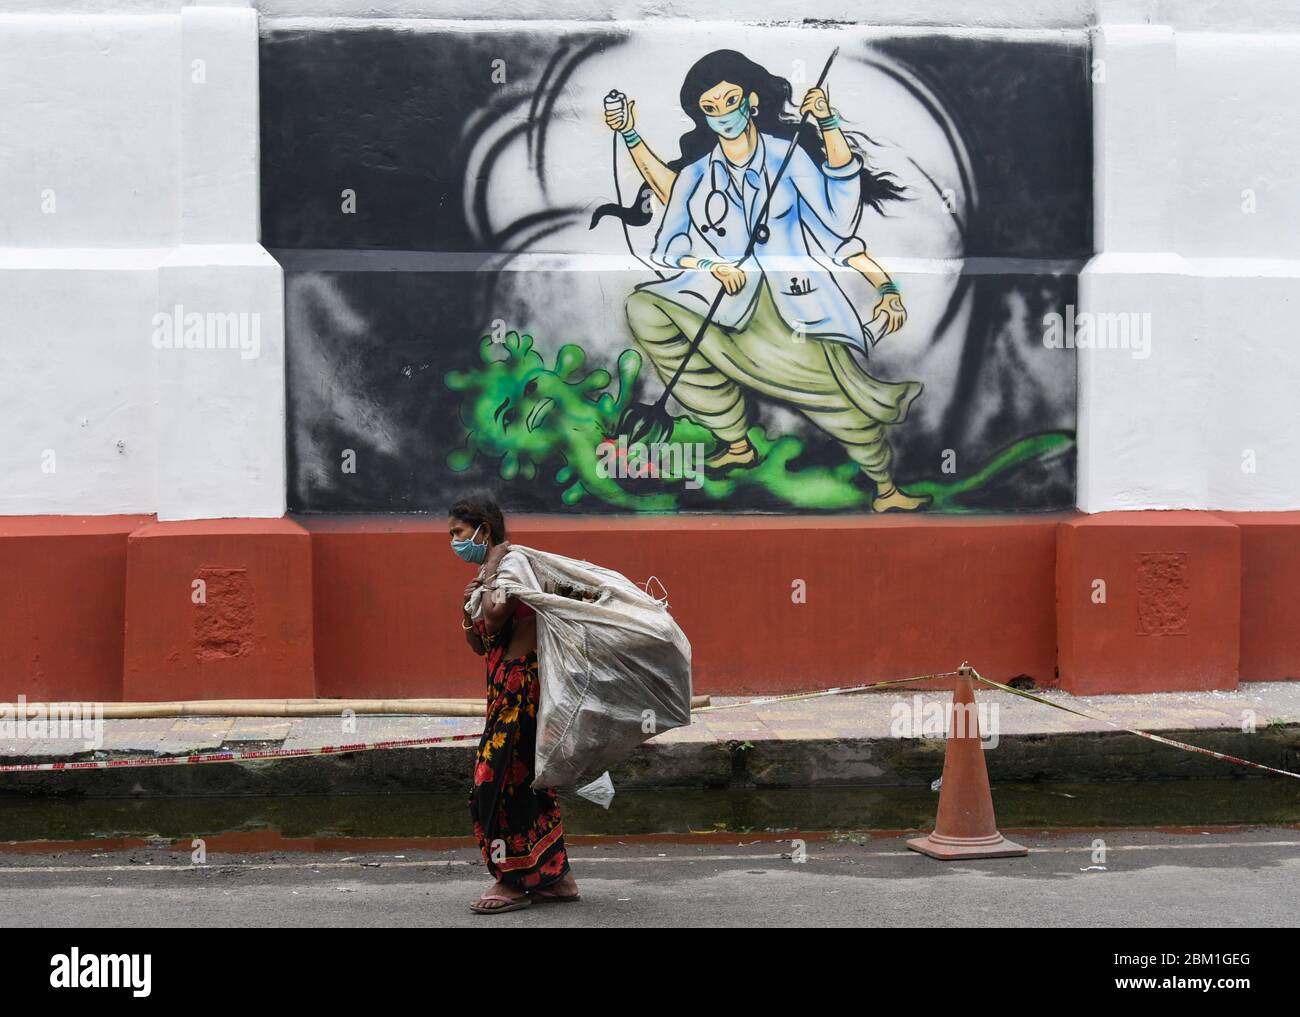 Guwahati, Assam, India. 6th May, 2020. Ragpicker walking past to a mural related to Coronavirus, authorities eased restrictions, during the ongoing COVID-19 nationwide lockdown, in Guwahati. Credit: David Talukdar/ZUMA Wire/Alamy Live News Stock Photo